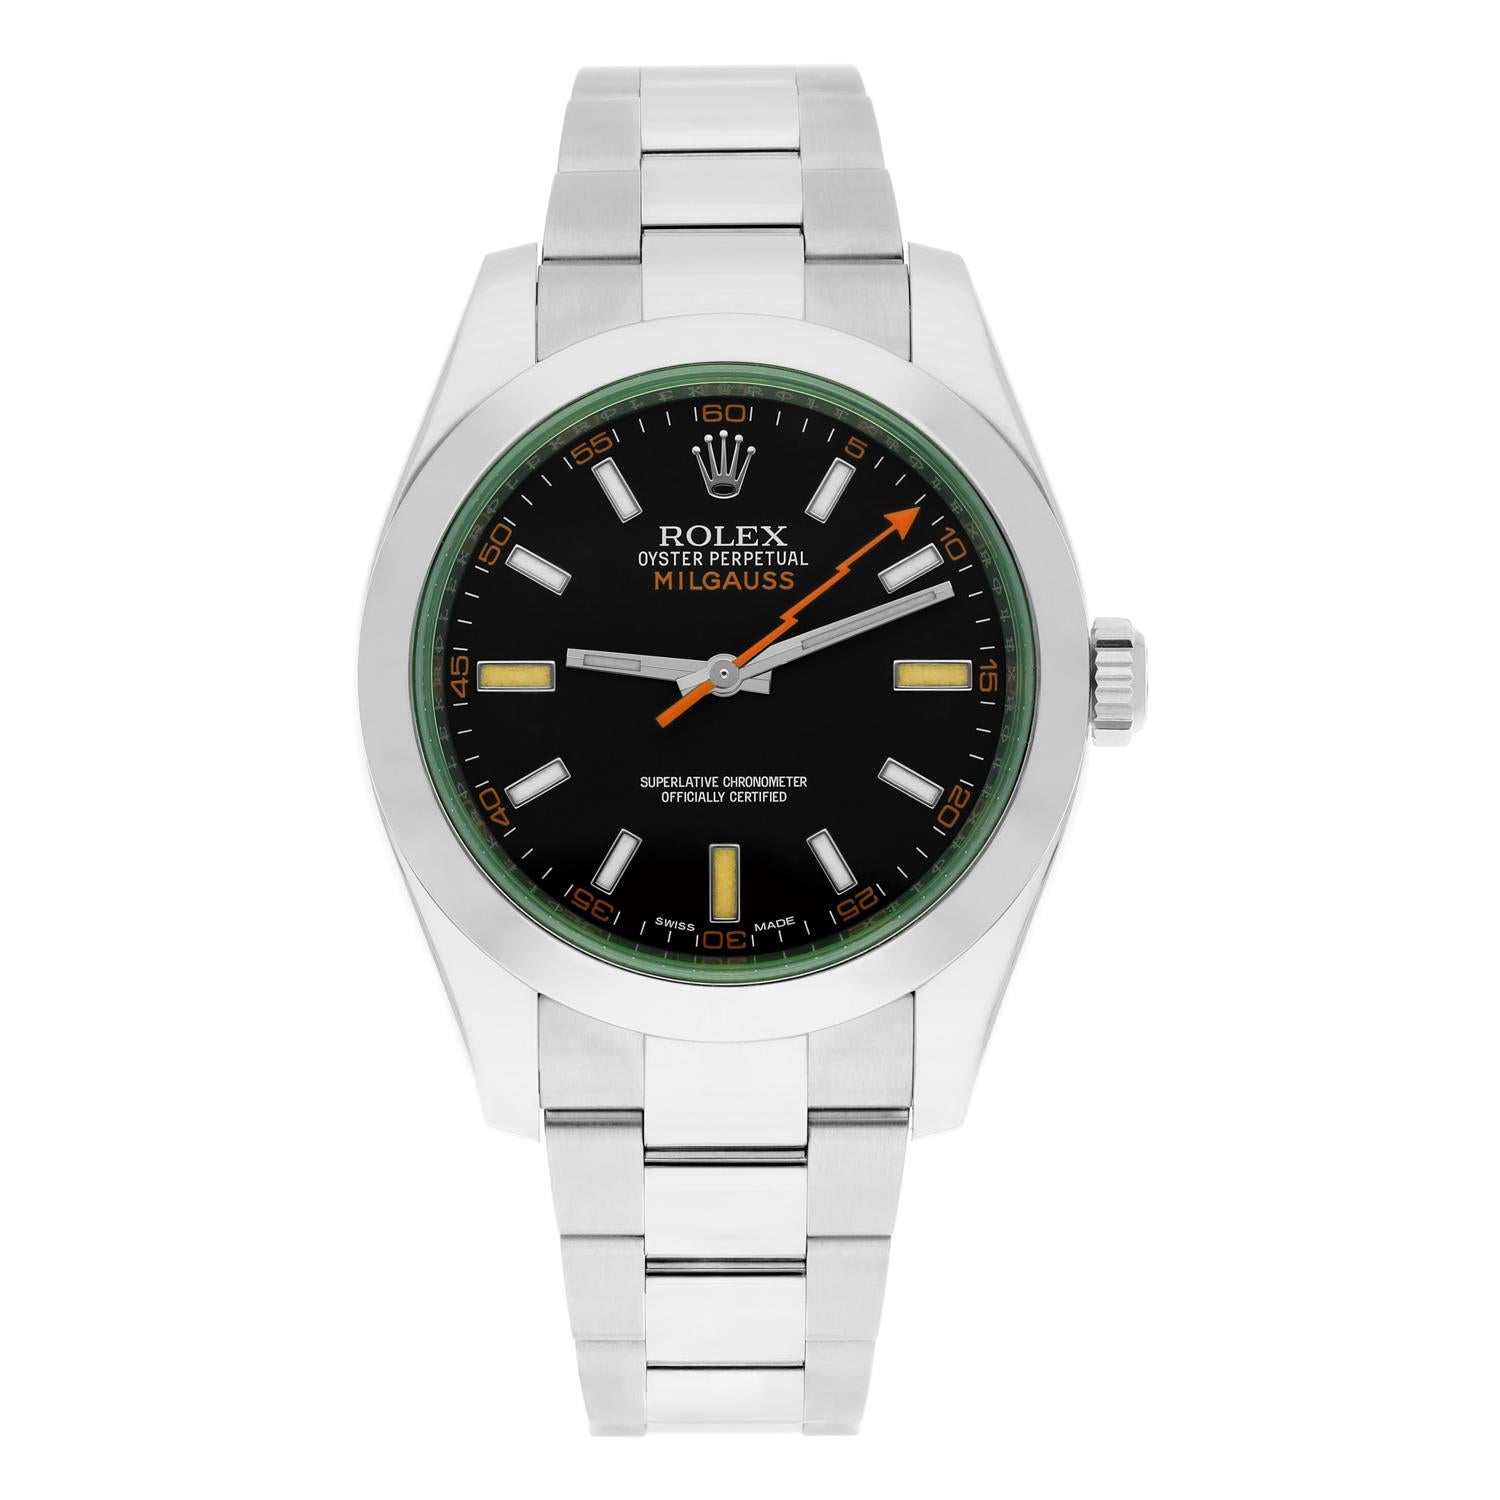 Rolex Stainless Steel 40mm Milgauss Black Dial 116400GV Box/Papers MINT

This watch has been professionally polished, serviced and does not have any visible scratches or blemishes. It is a genuine Rolex which has been inspected to verify